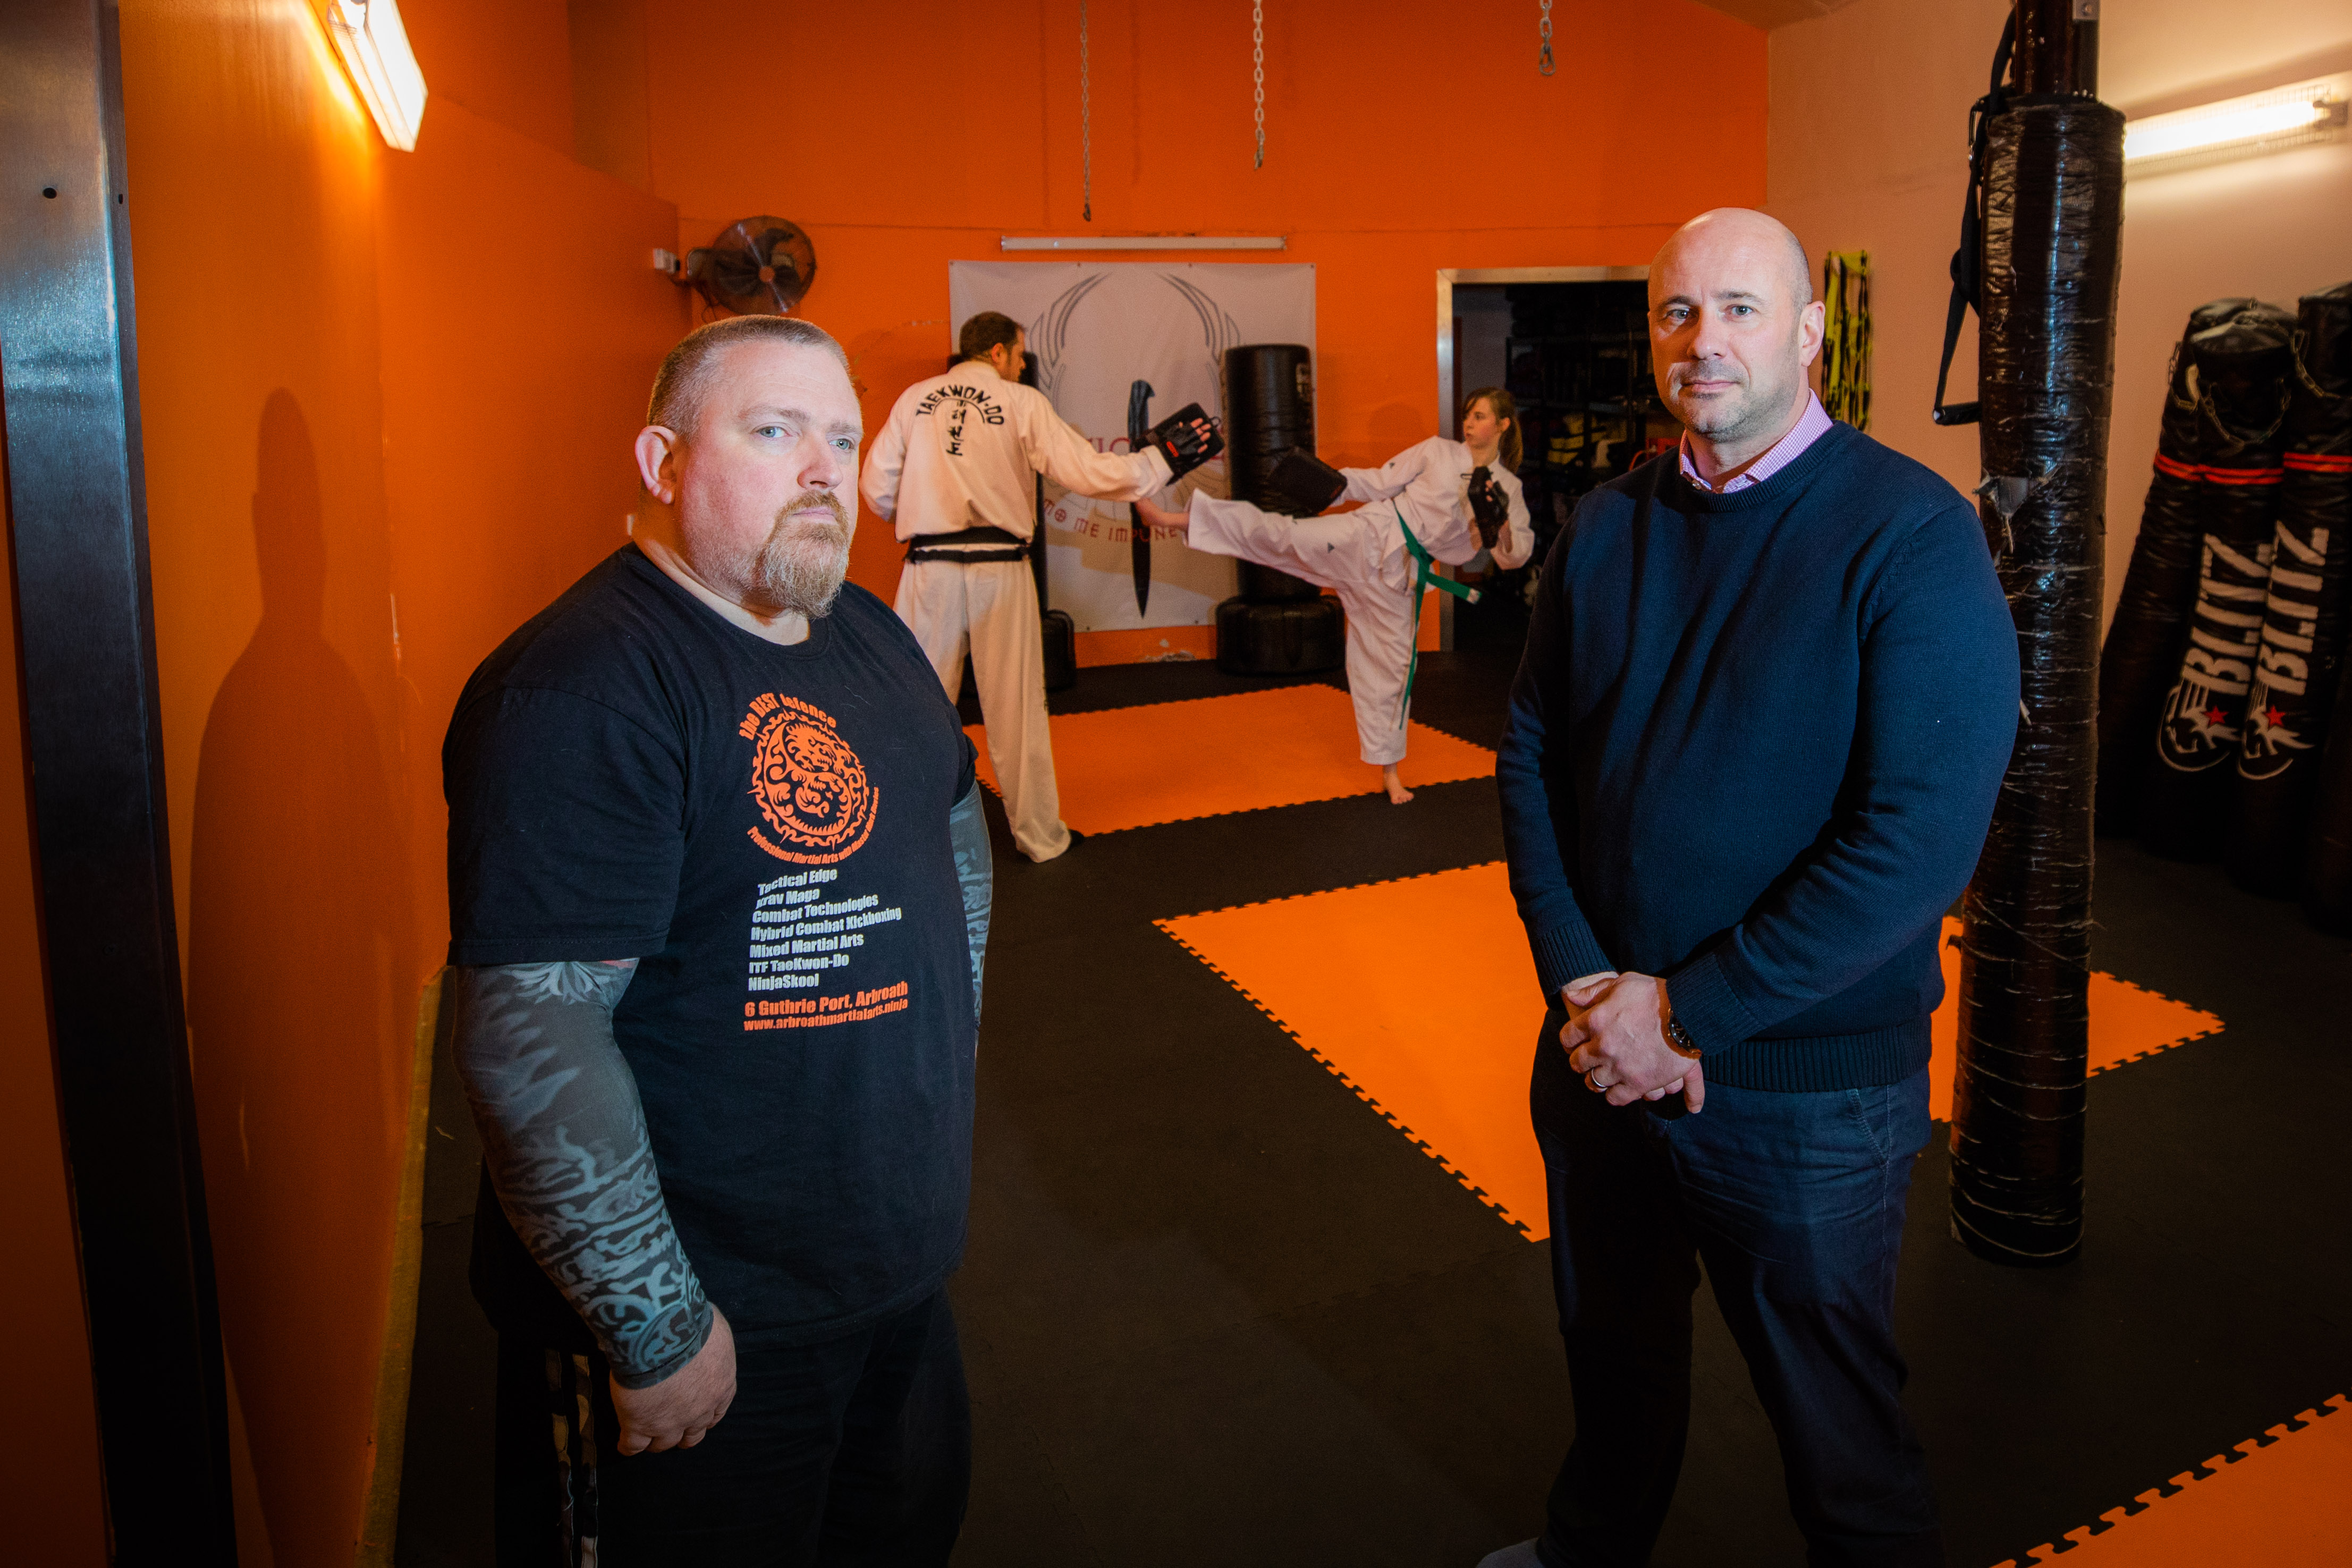 Angus school Education Convener Derek Wann meeting anti-bullying champion and martial arts expert Mark Davies who includes anti-bullying in his school's children's curriculum.